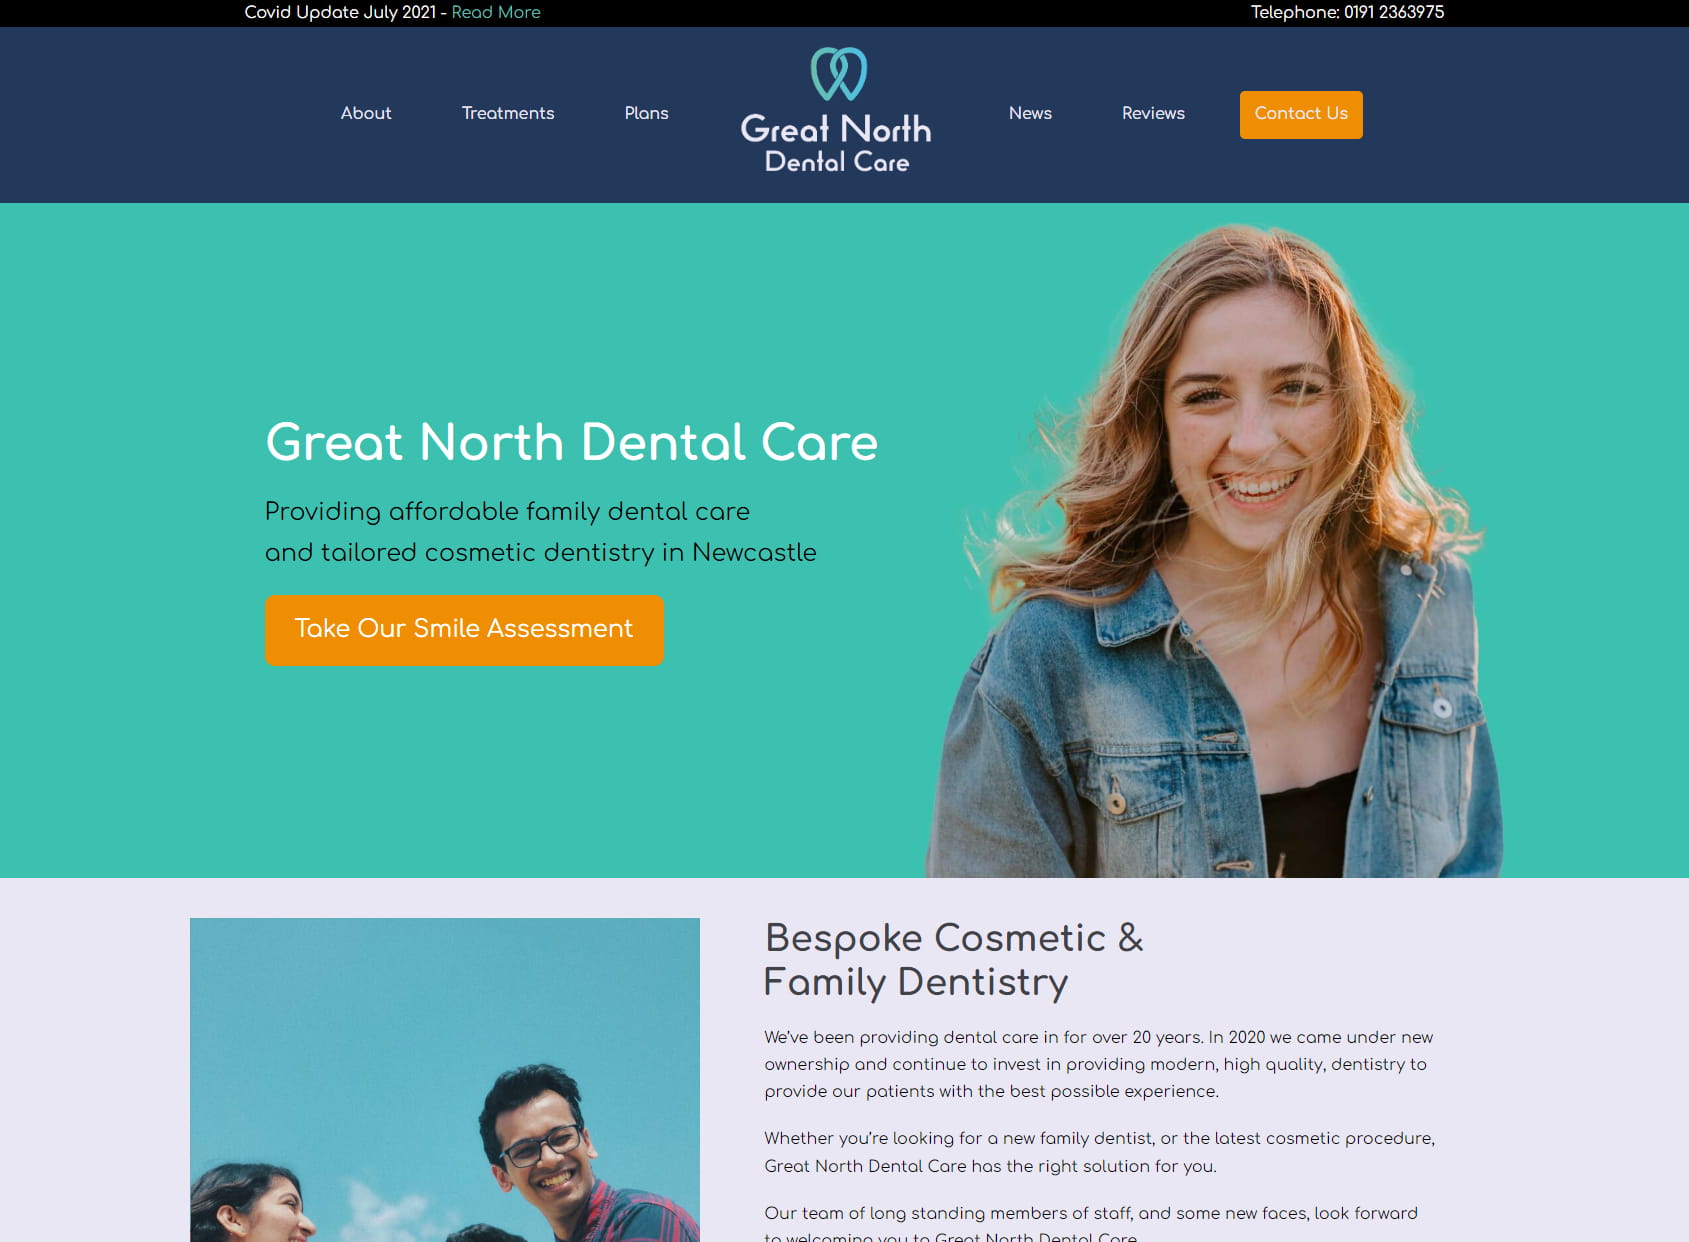 Great North Dental Care